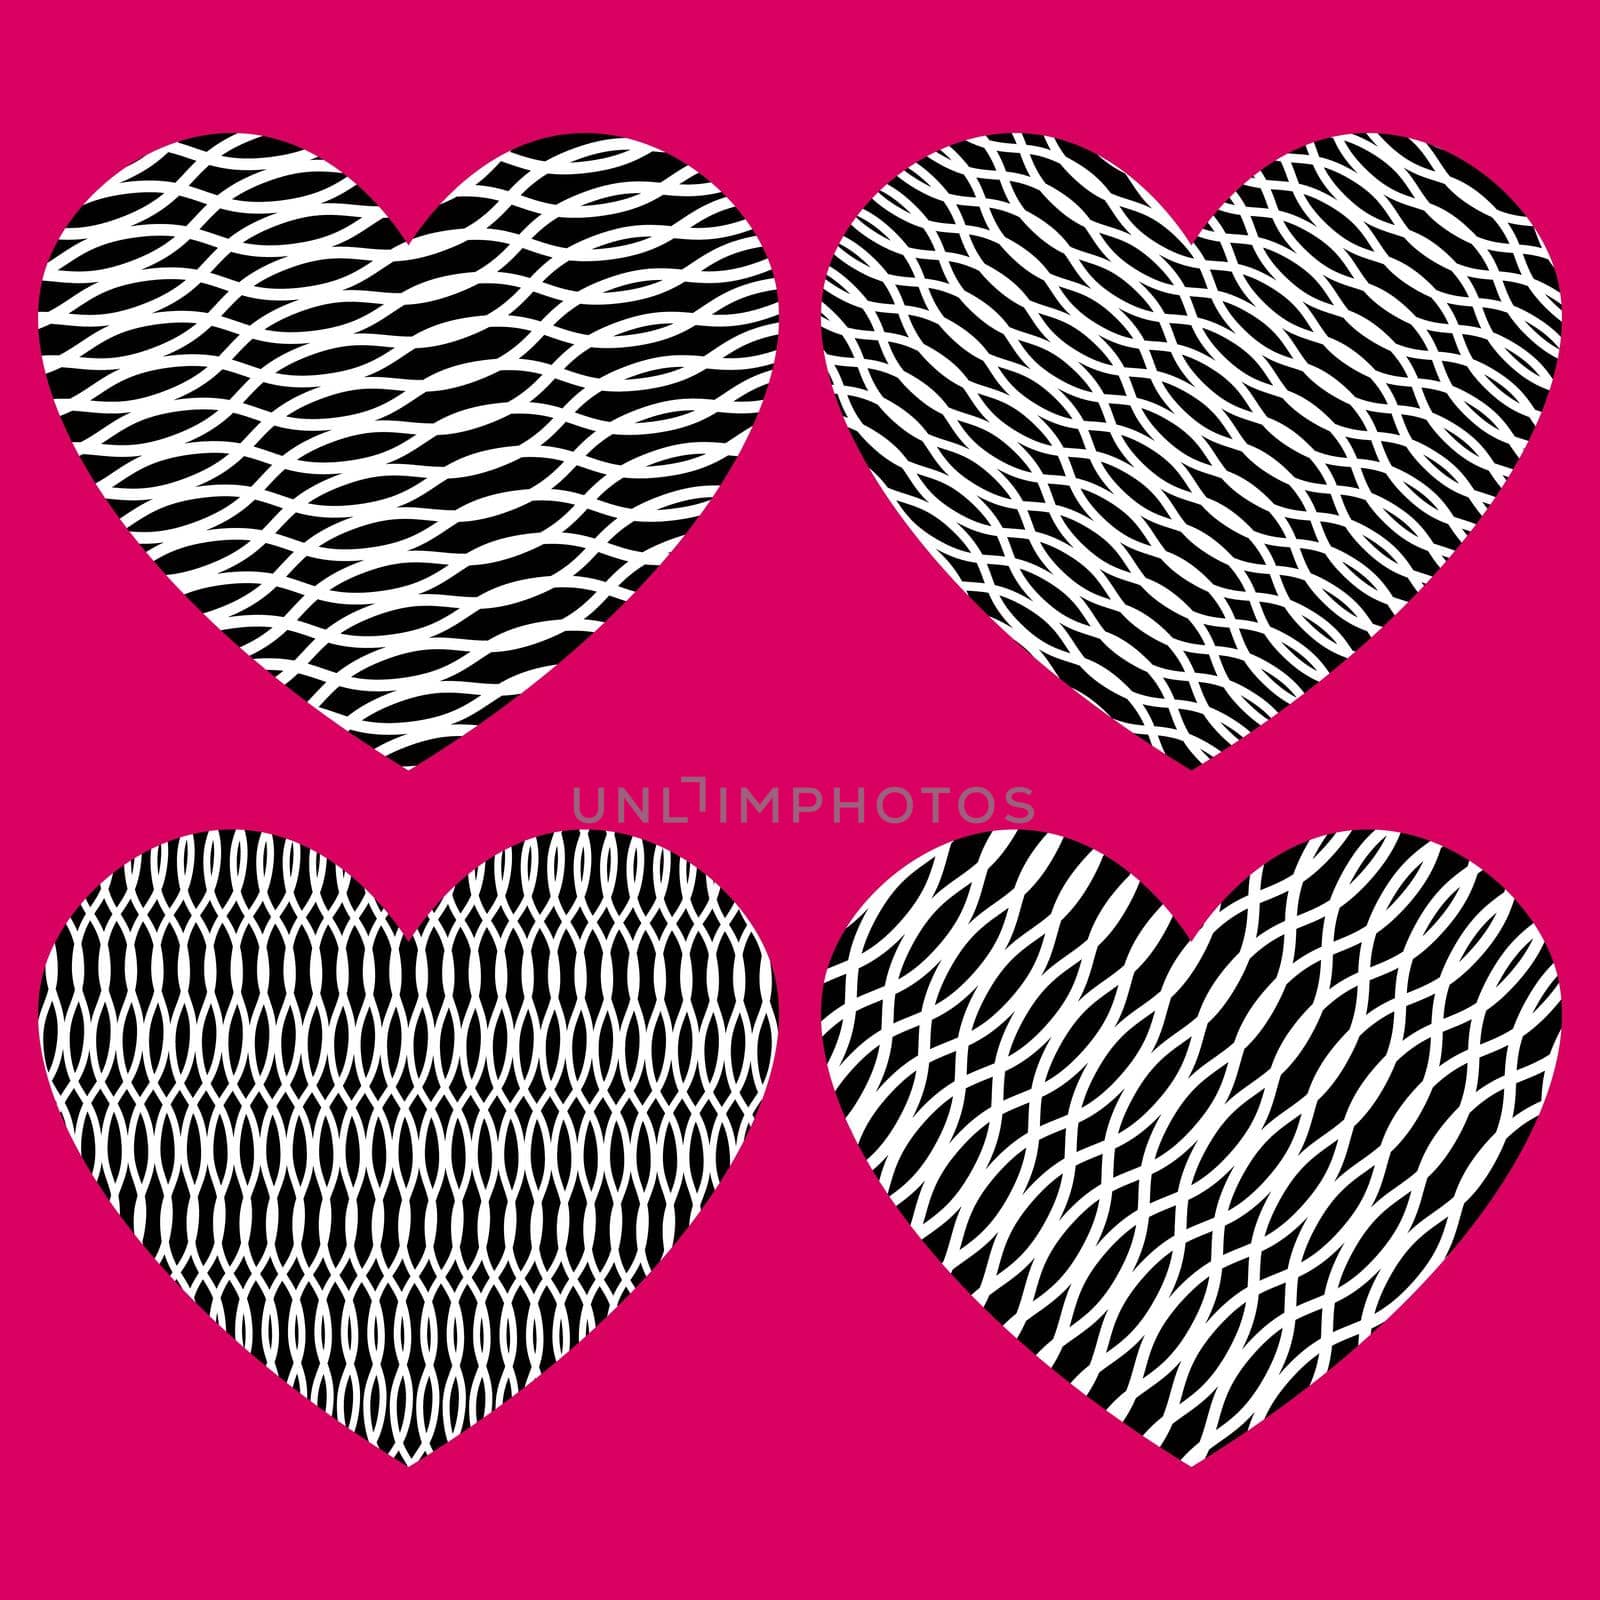 Black hand drawn heart. Design elements for Valentine's day, wedding, birthday, Mothers Day. Outline sihlouette. Love vector illustration for posters, card, postcard. Decorative isolated icons